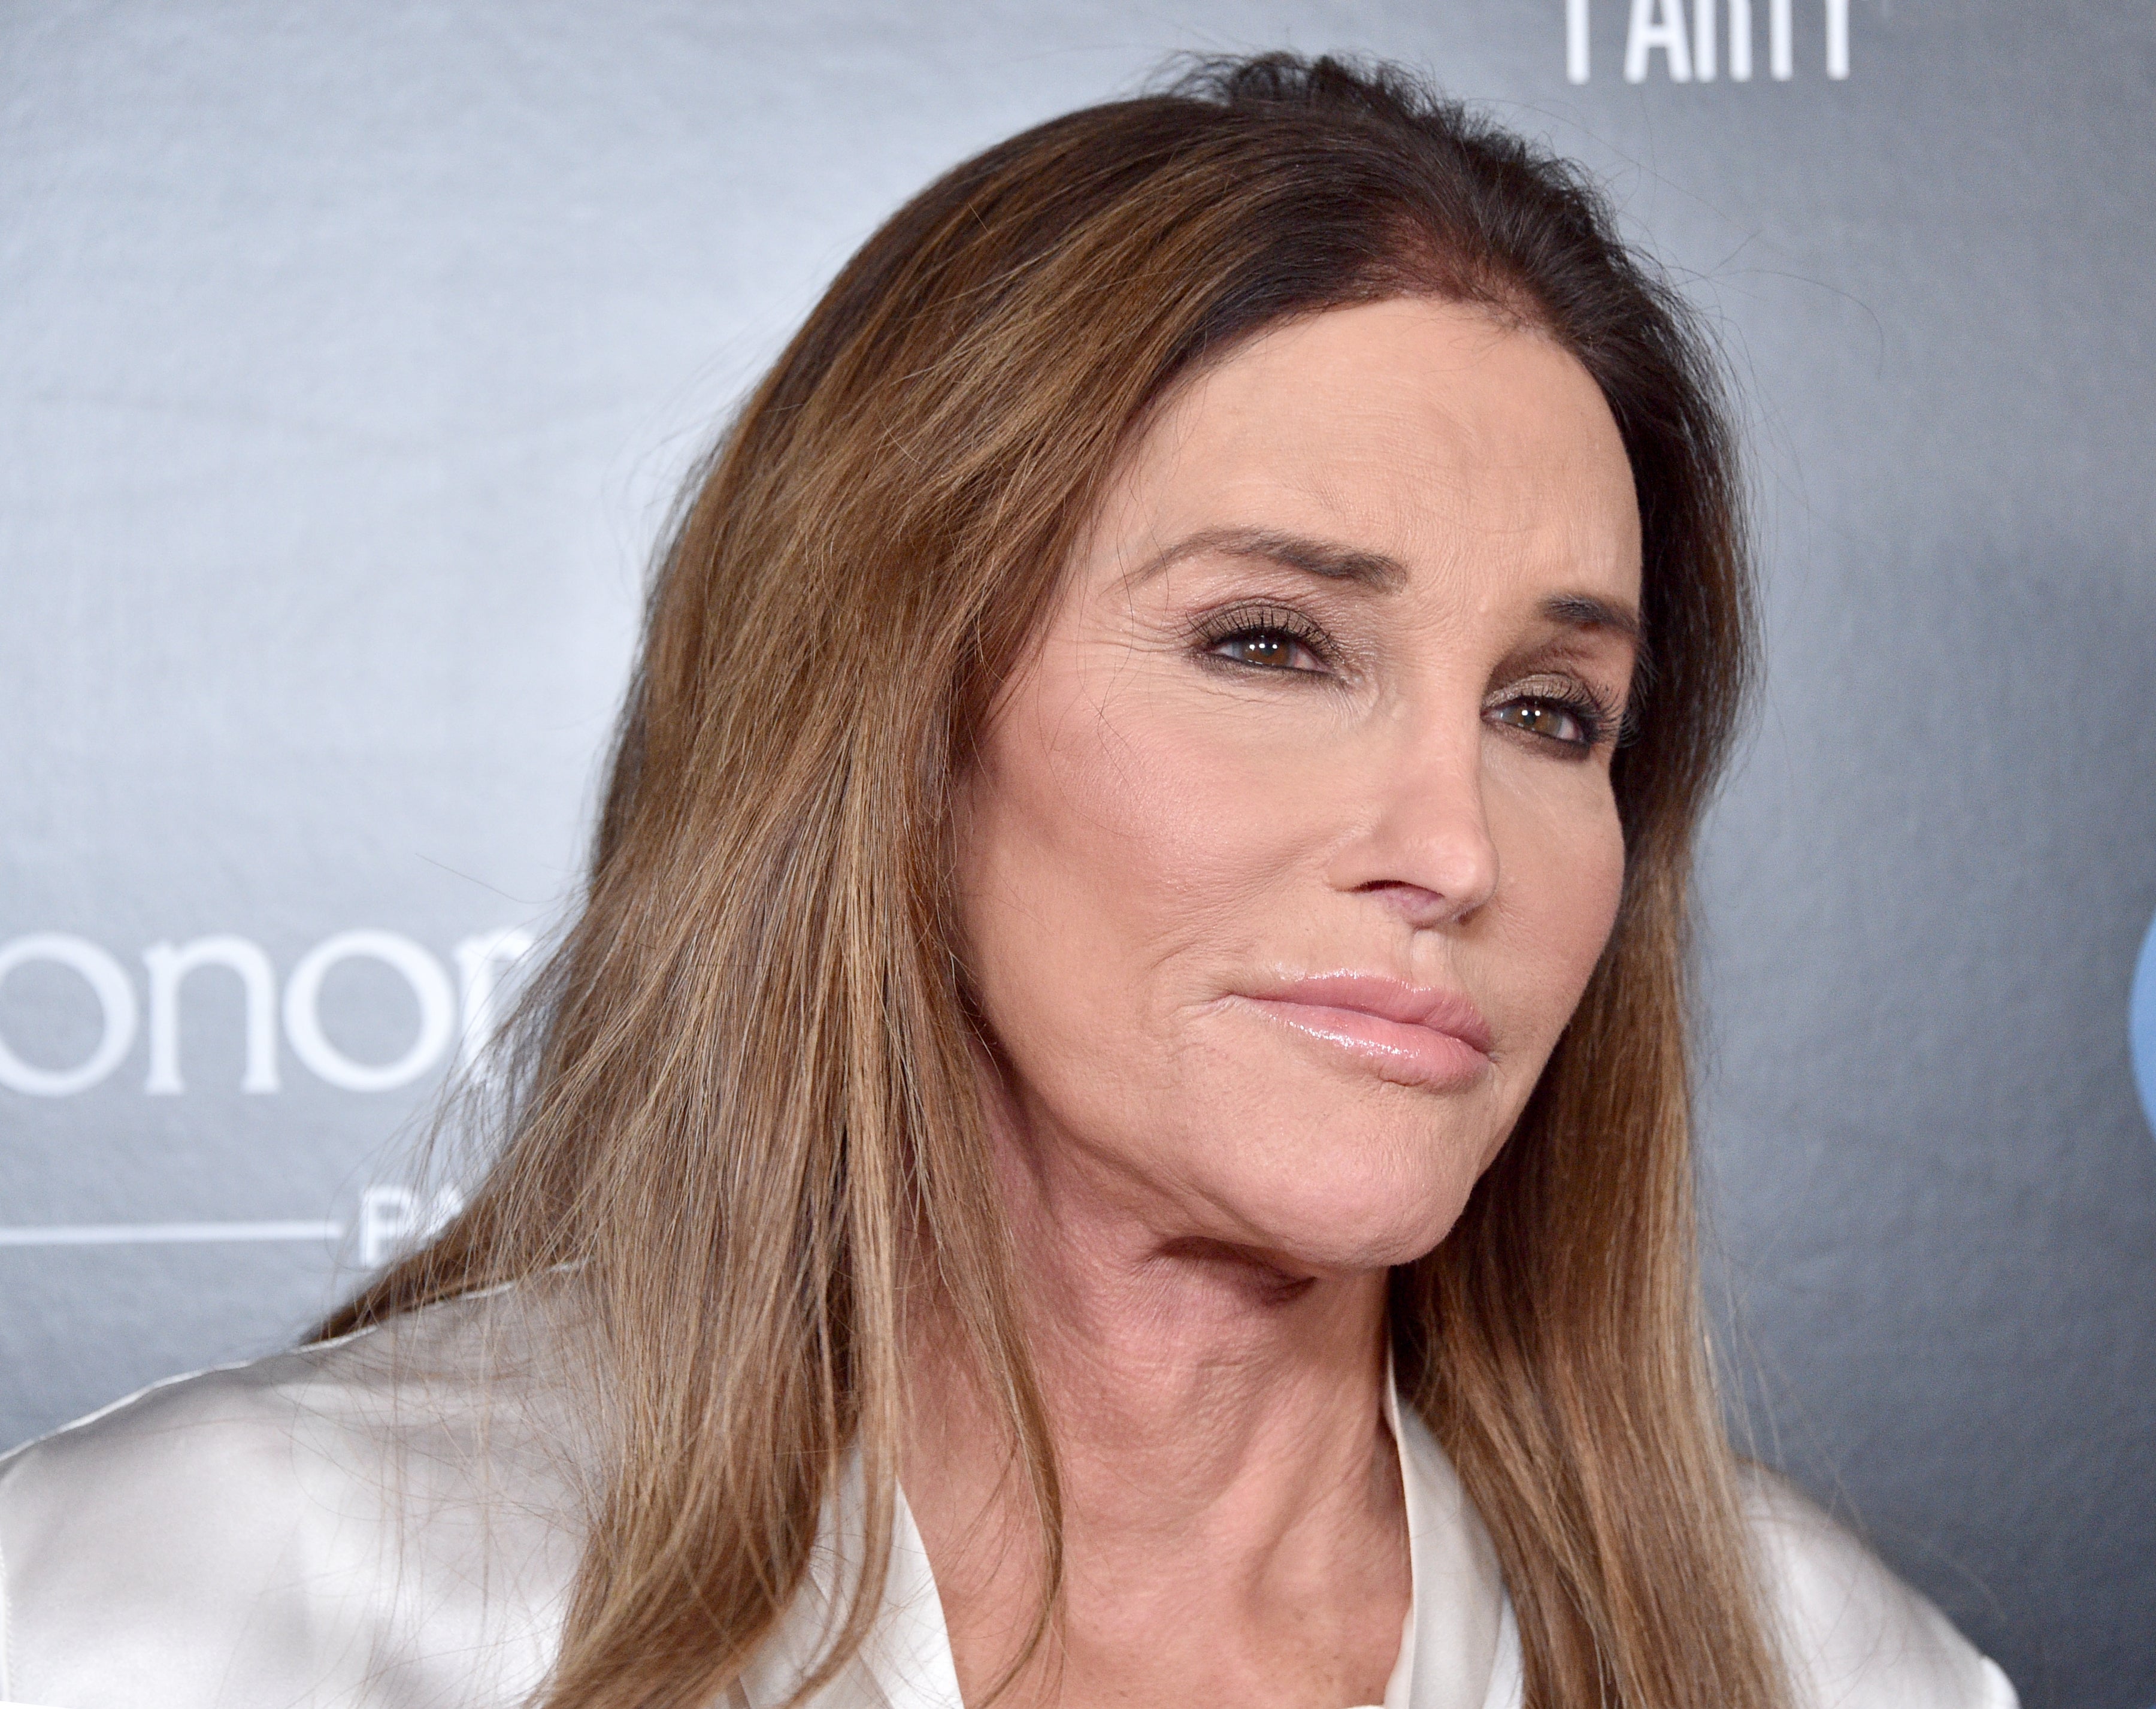 Caitlyn Jenner is running to replace California governor Gavin Newsom